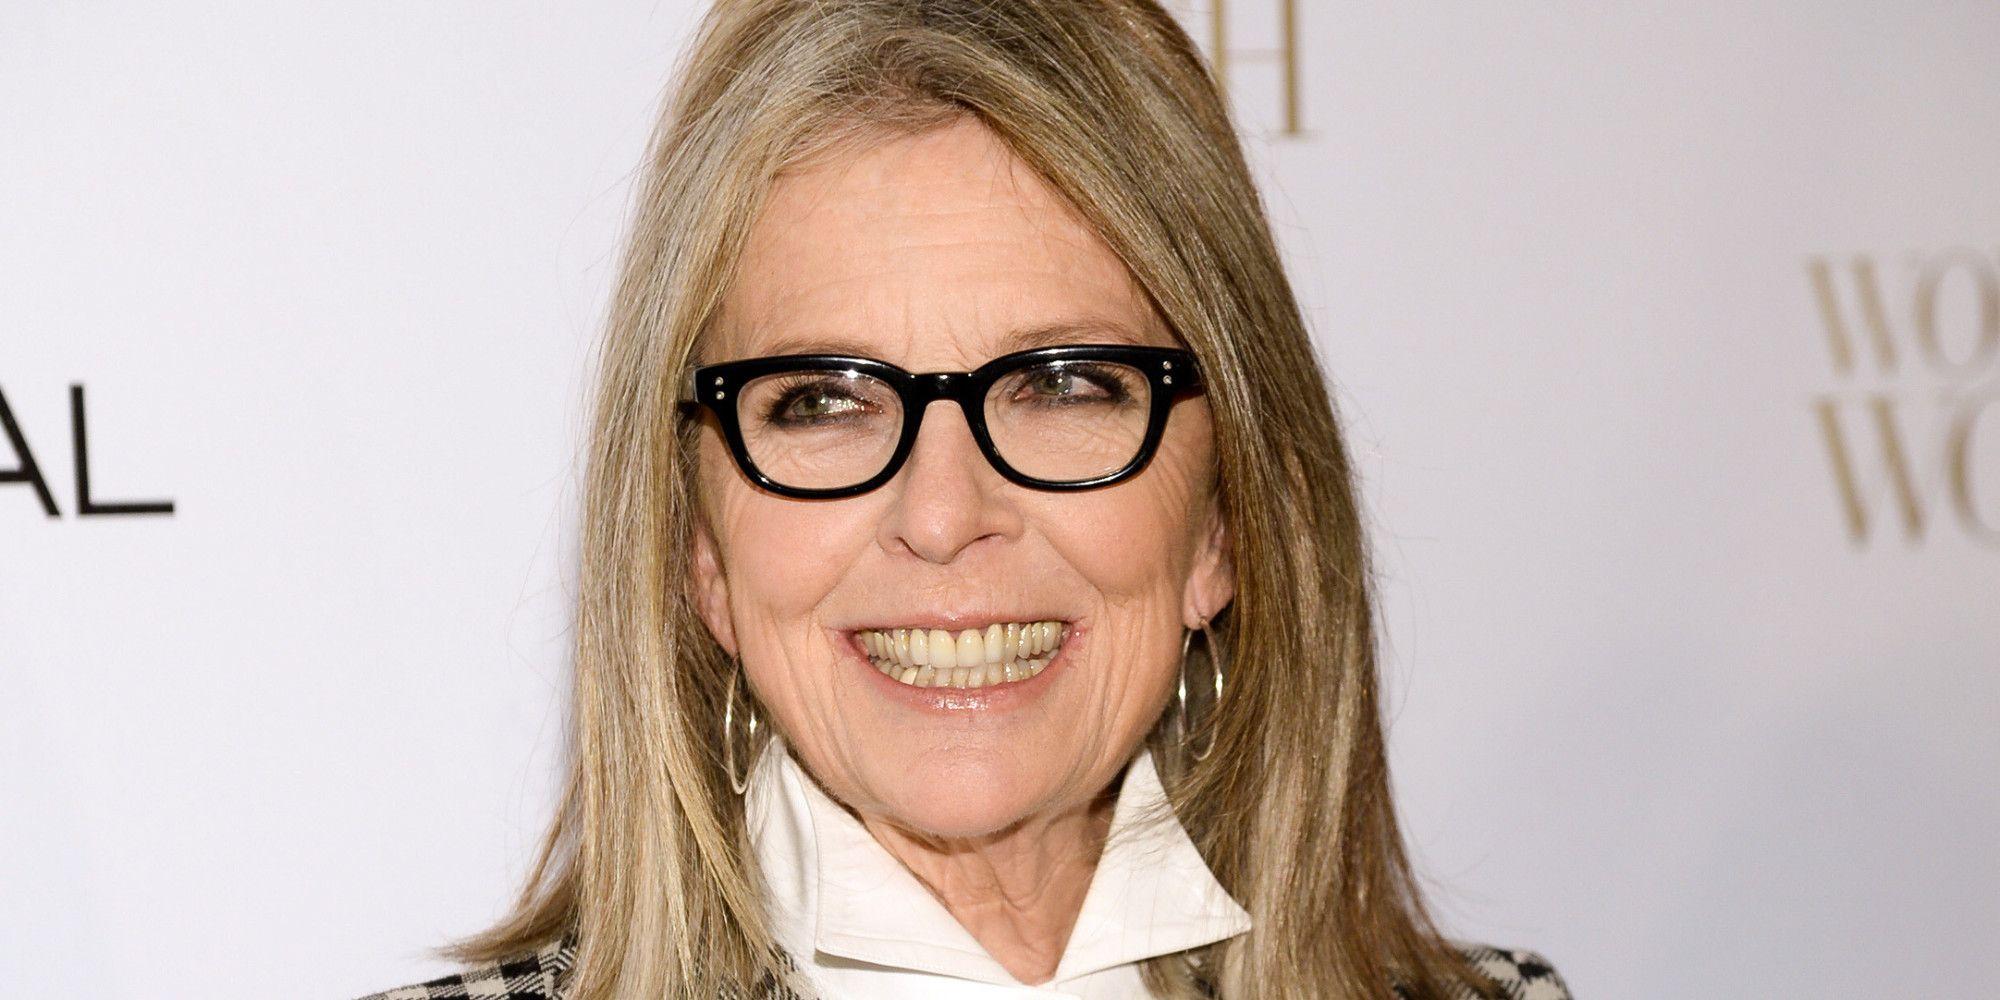 Attending Diane Keaton Hairstyles Can Be A Disaster If You Forget